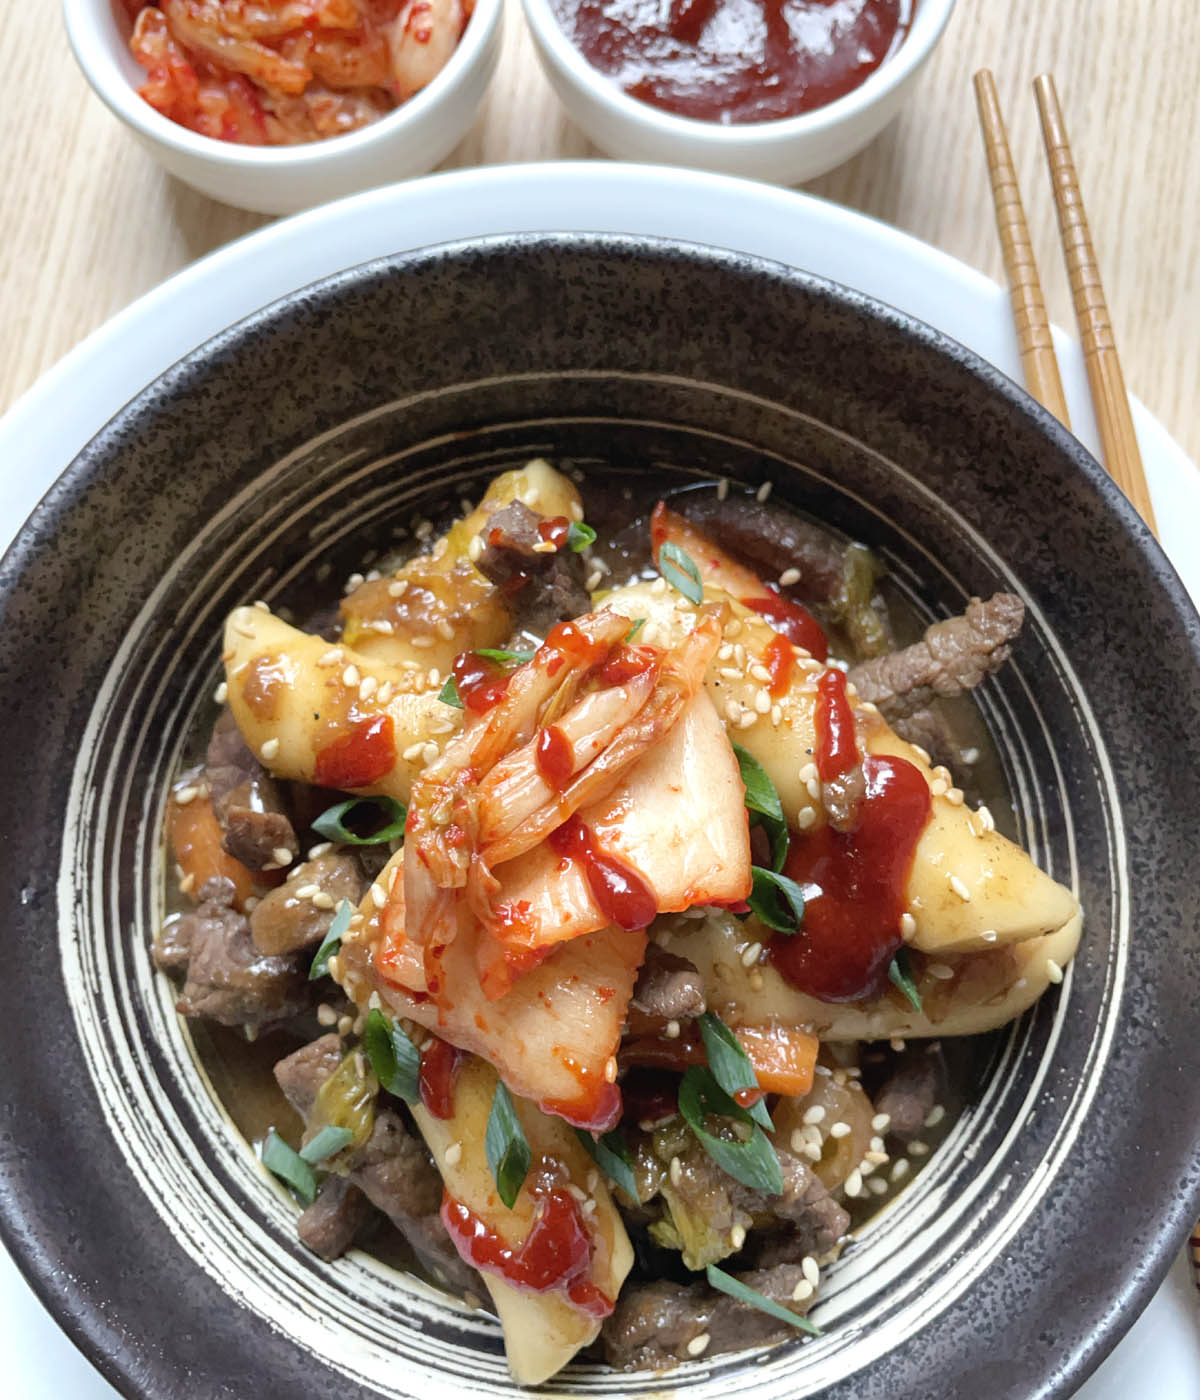 A dark round dish containing stir-fried rice cakes, cooked beef and vegetables, and topped with kimchi and red chili sauce.